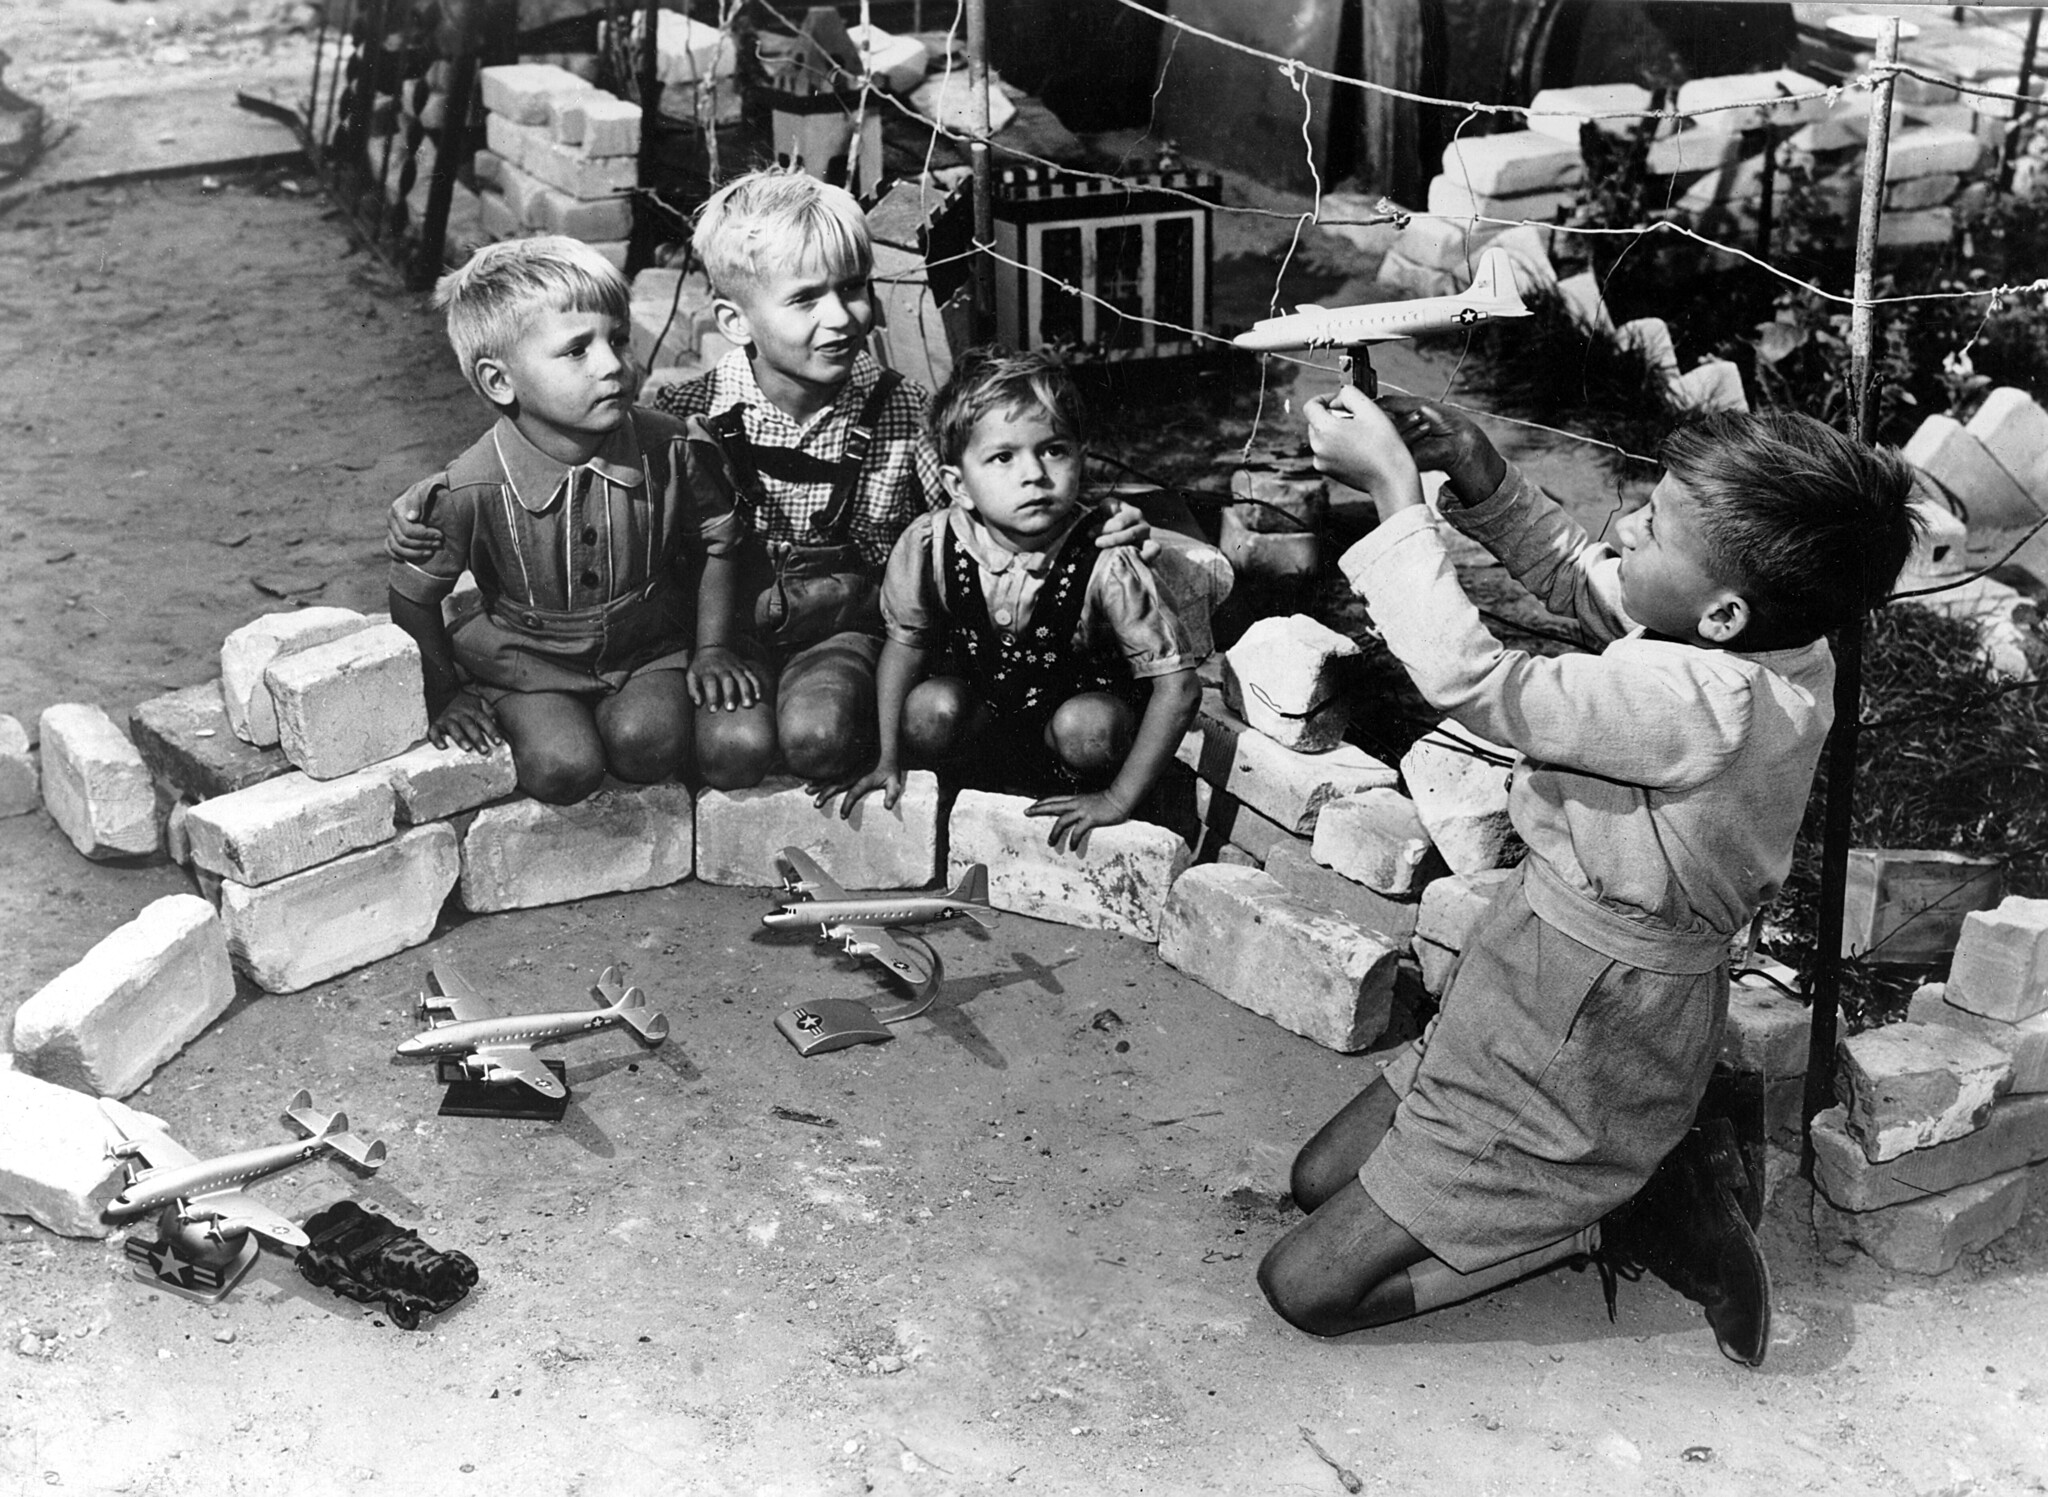 German children in Berlin playing with model U.S. airplanes during the Berlin Airlift.